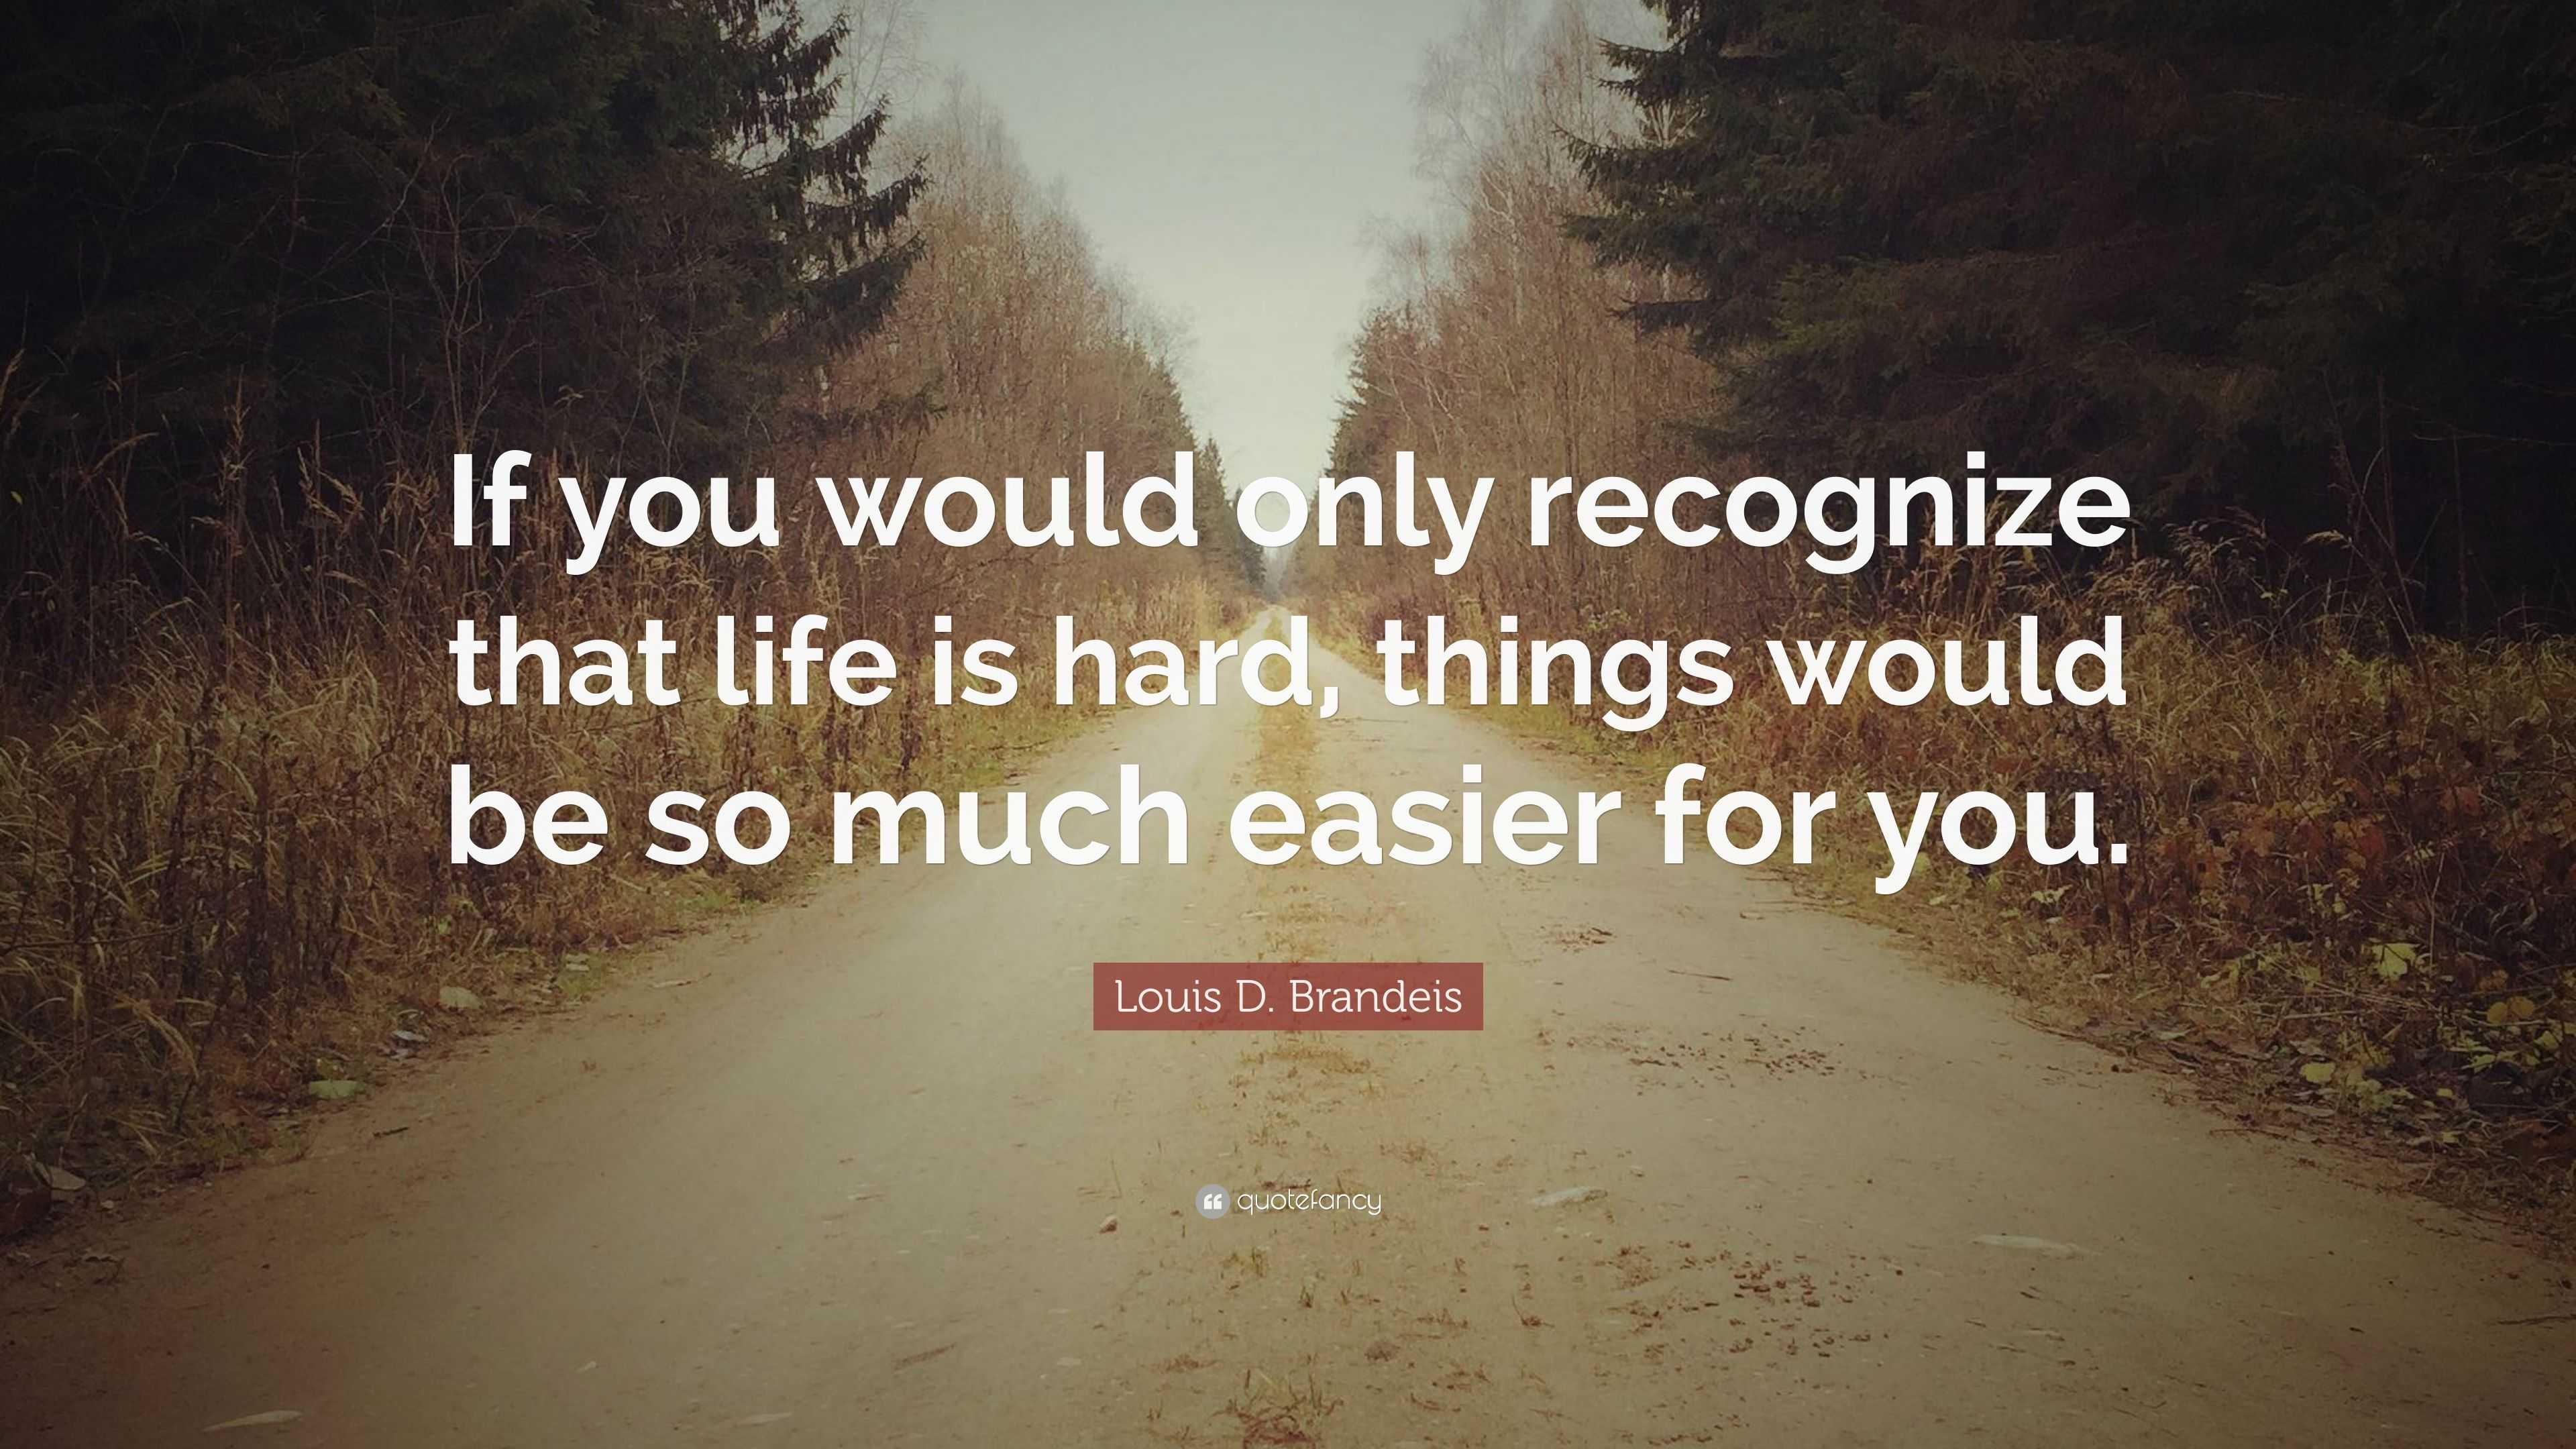 Louis D. Brandeis Quote: “If you would only recognize that life is hard,  things would be